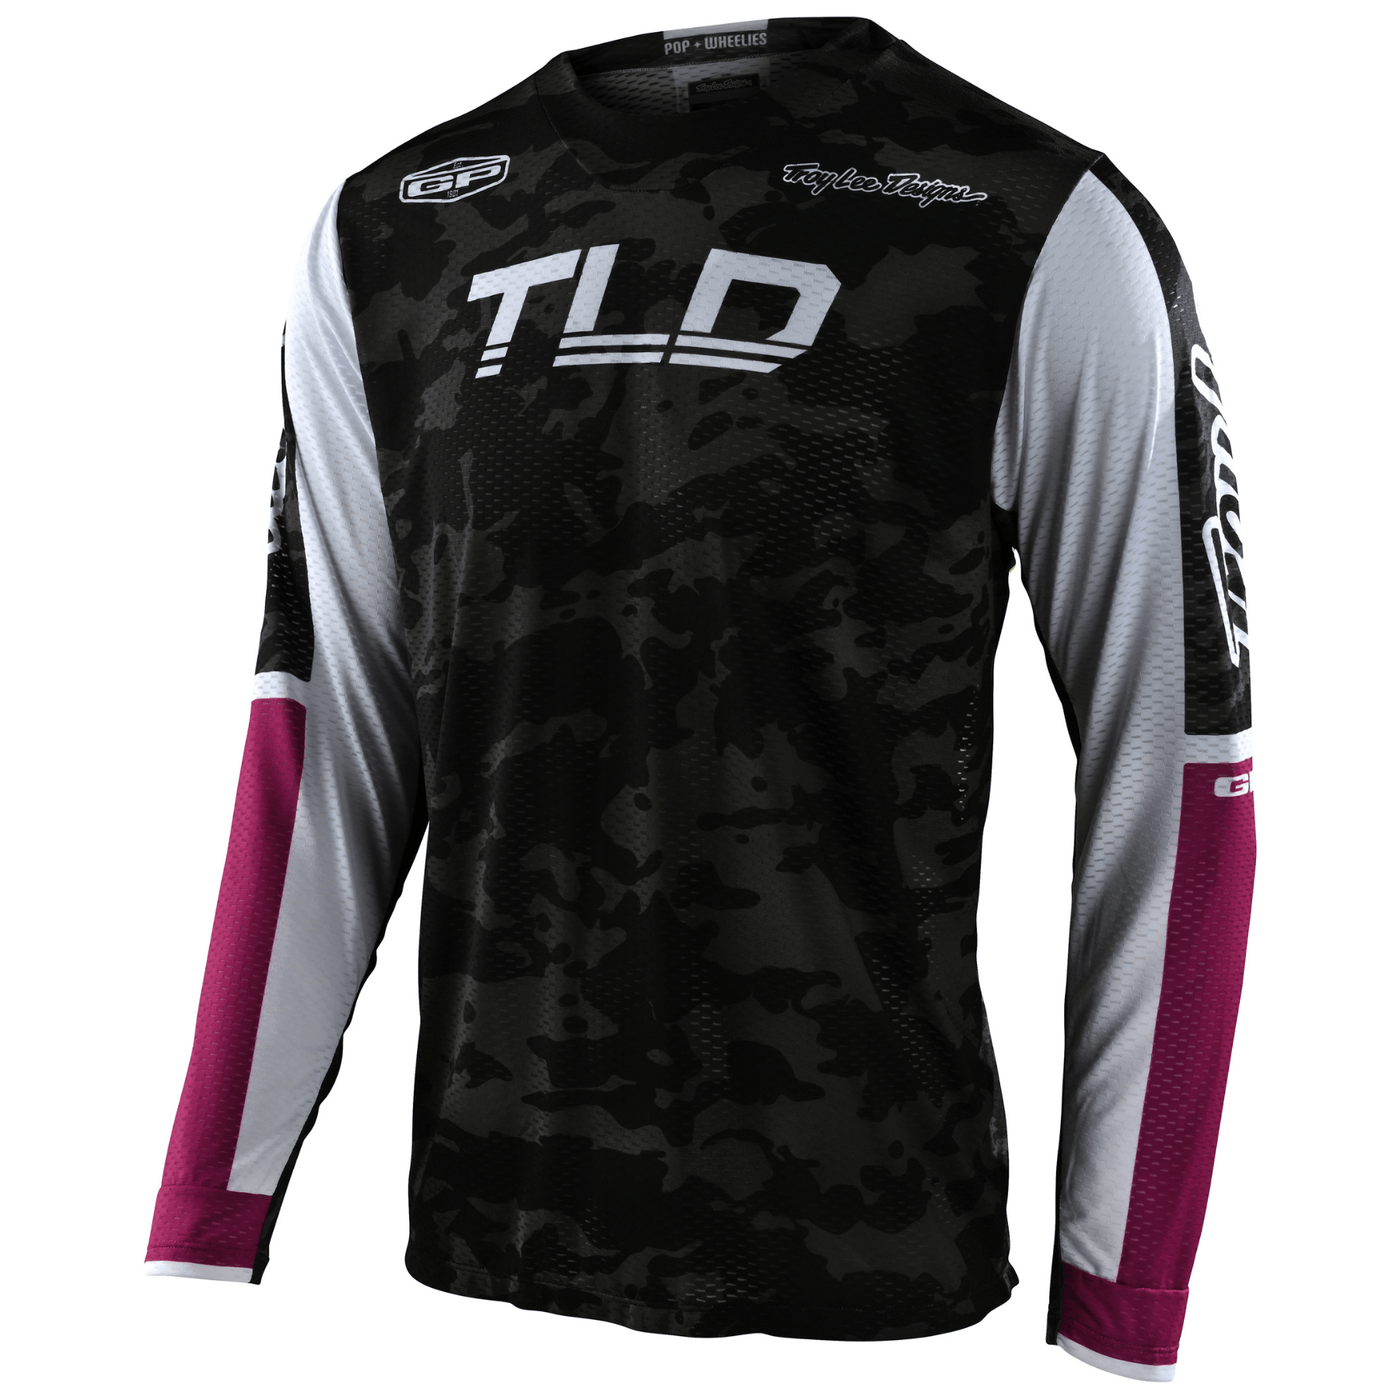 Troy Lee Designs GP AIR Jersey Veloce Camo - Black/Glo Green 8Lines Shop - Fast Shipping